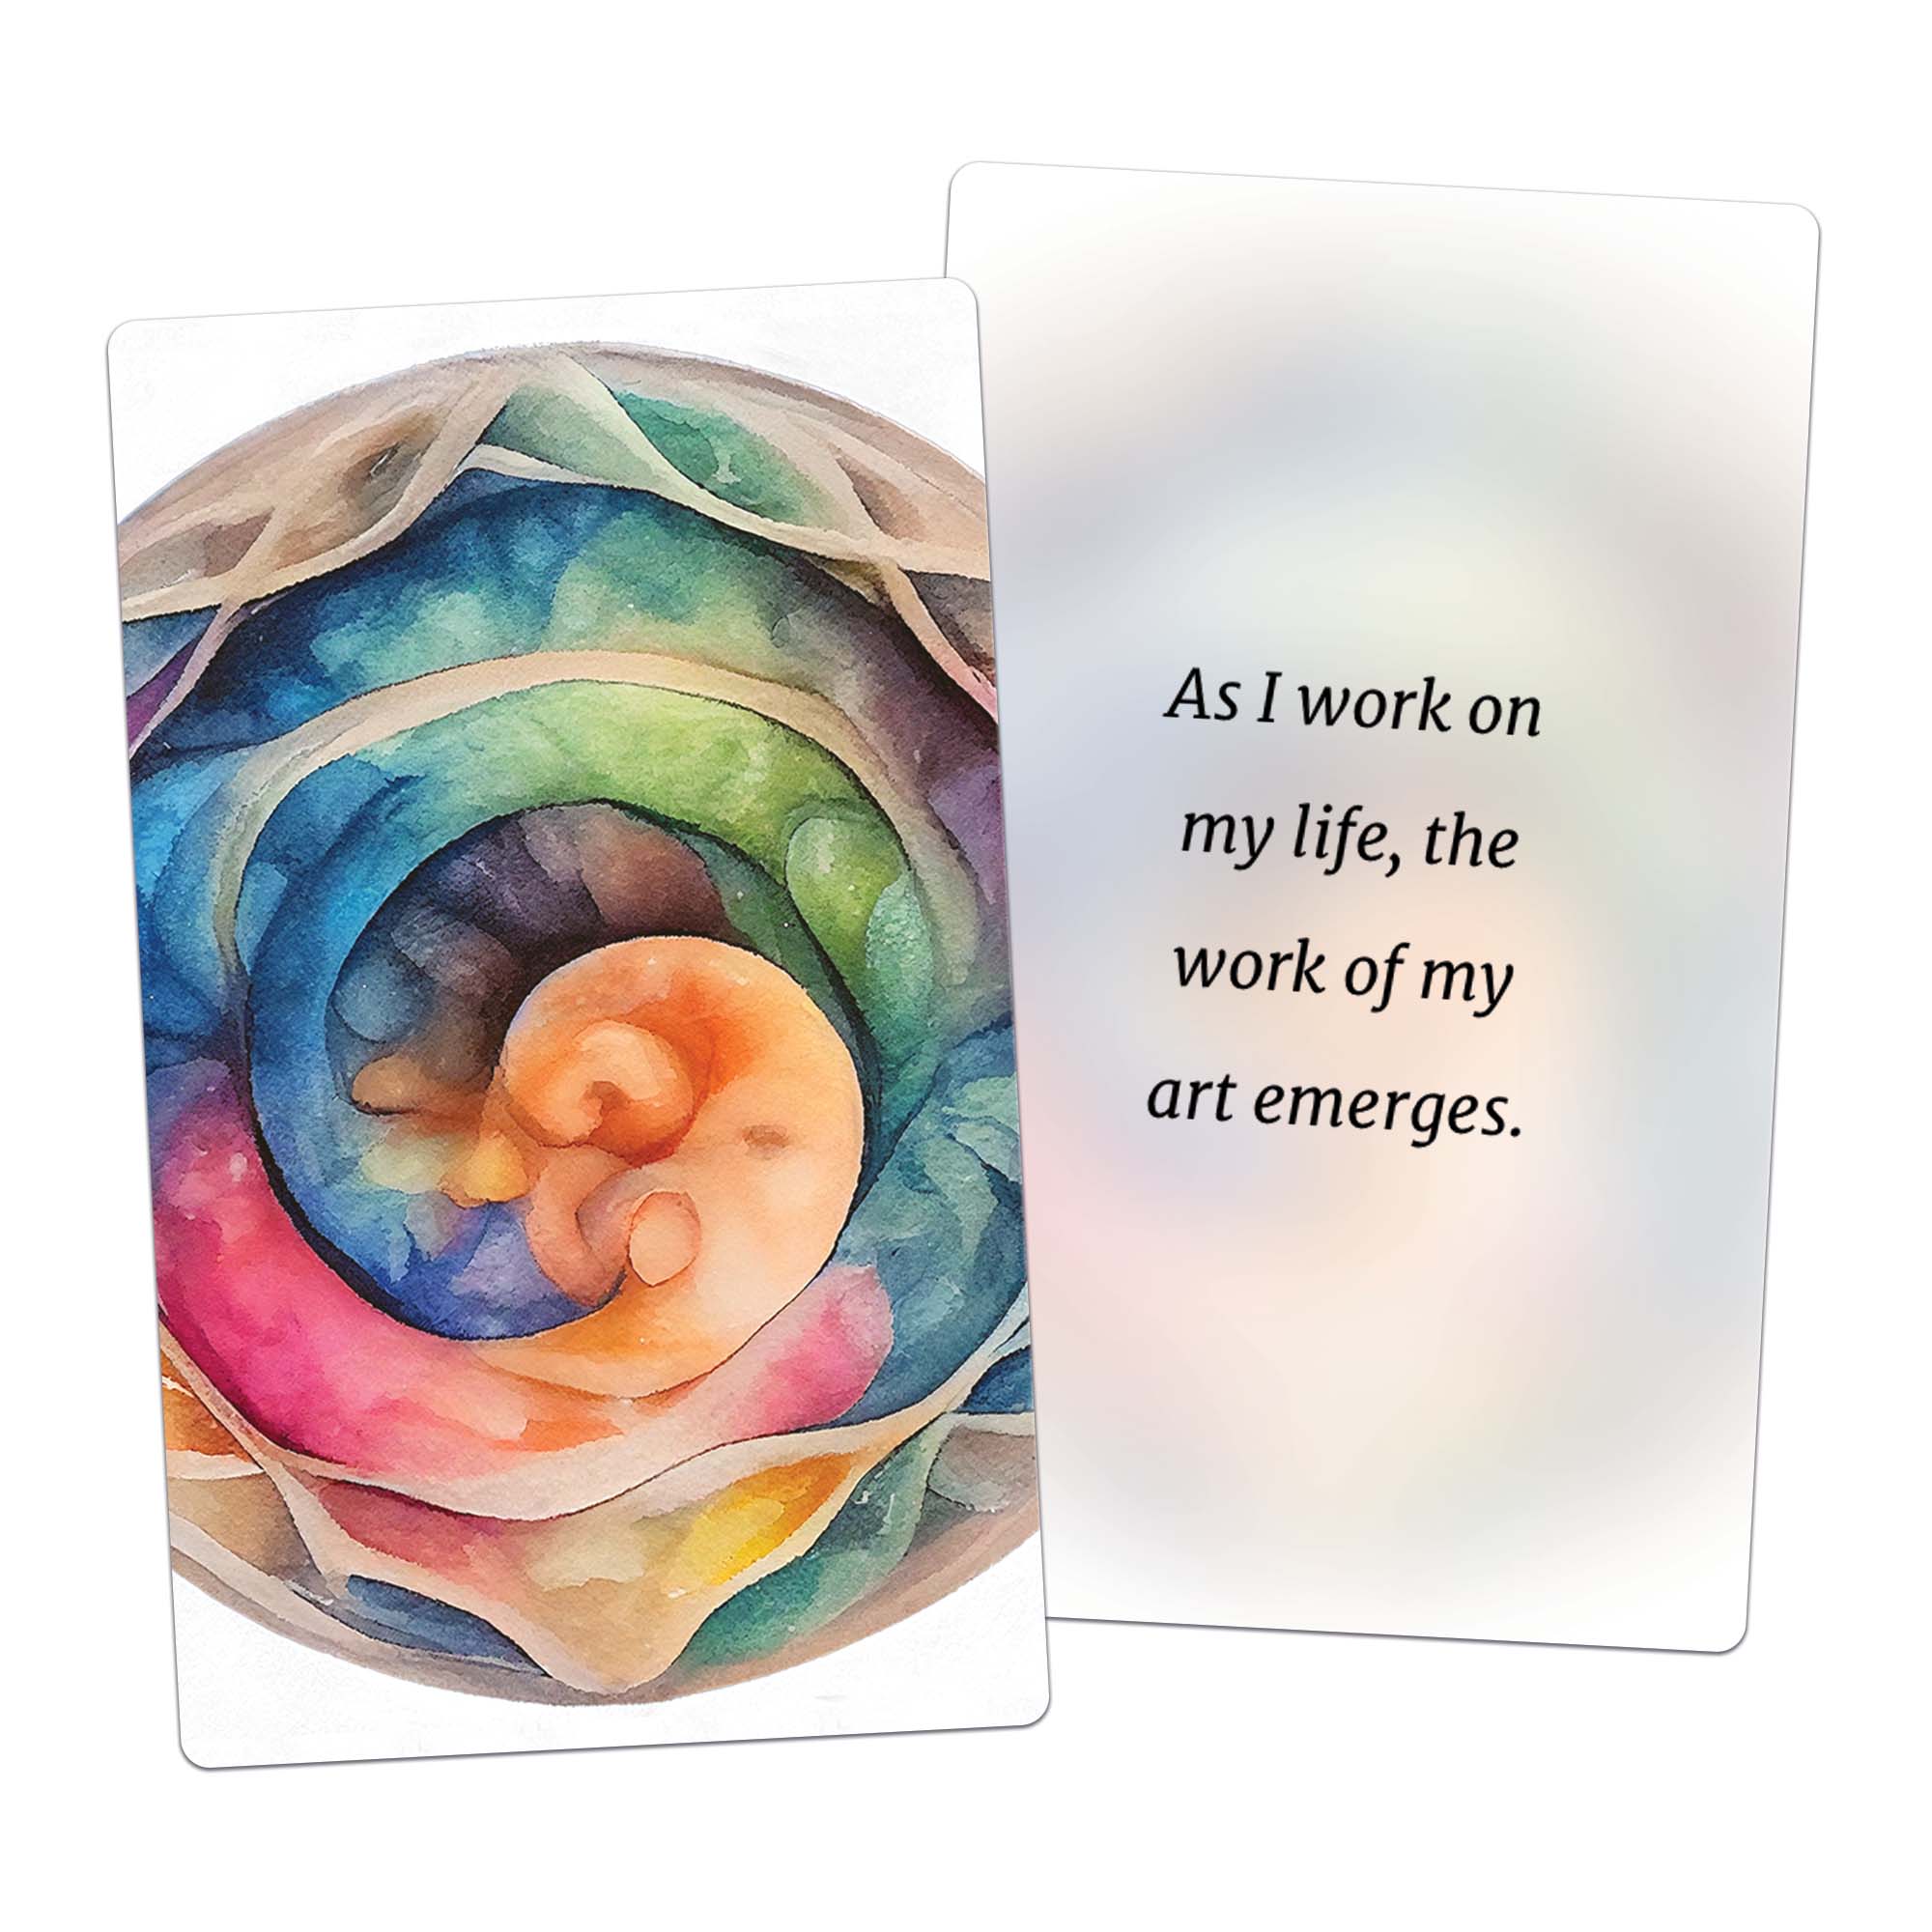 As I work on my life, the work of my art emerges. (affirmation card)